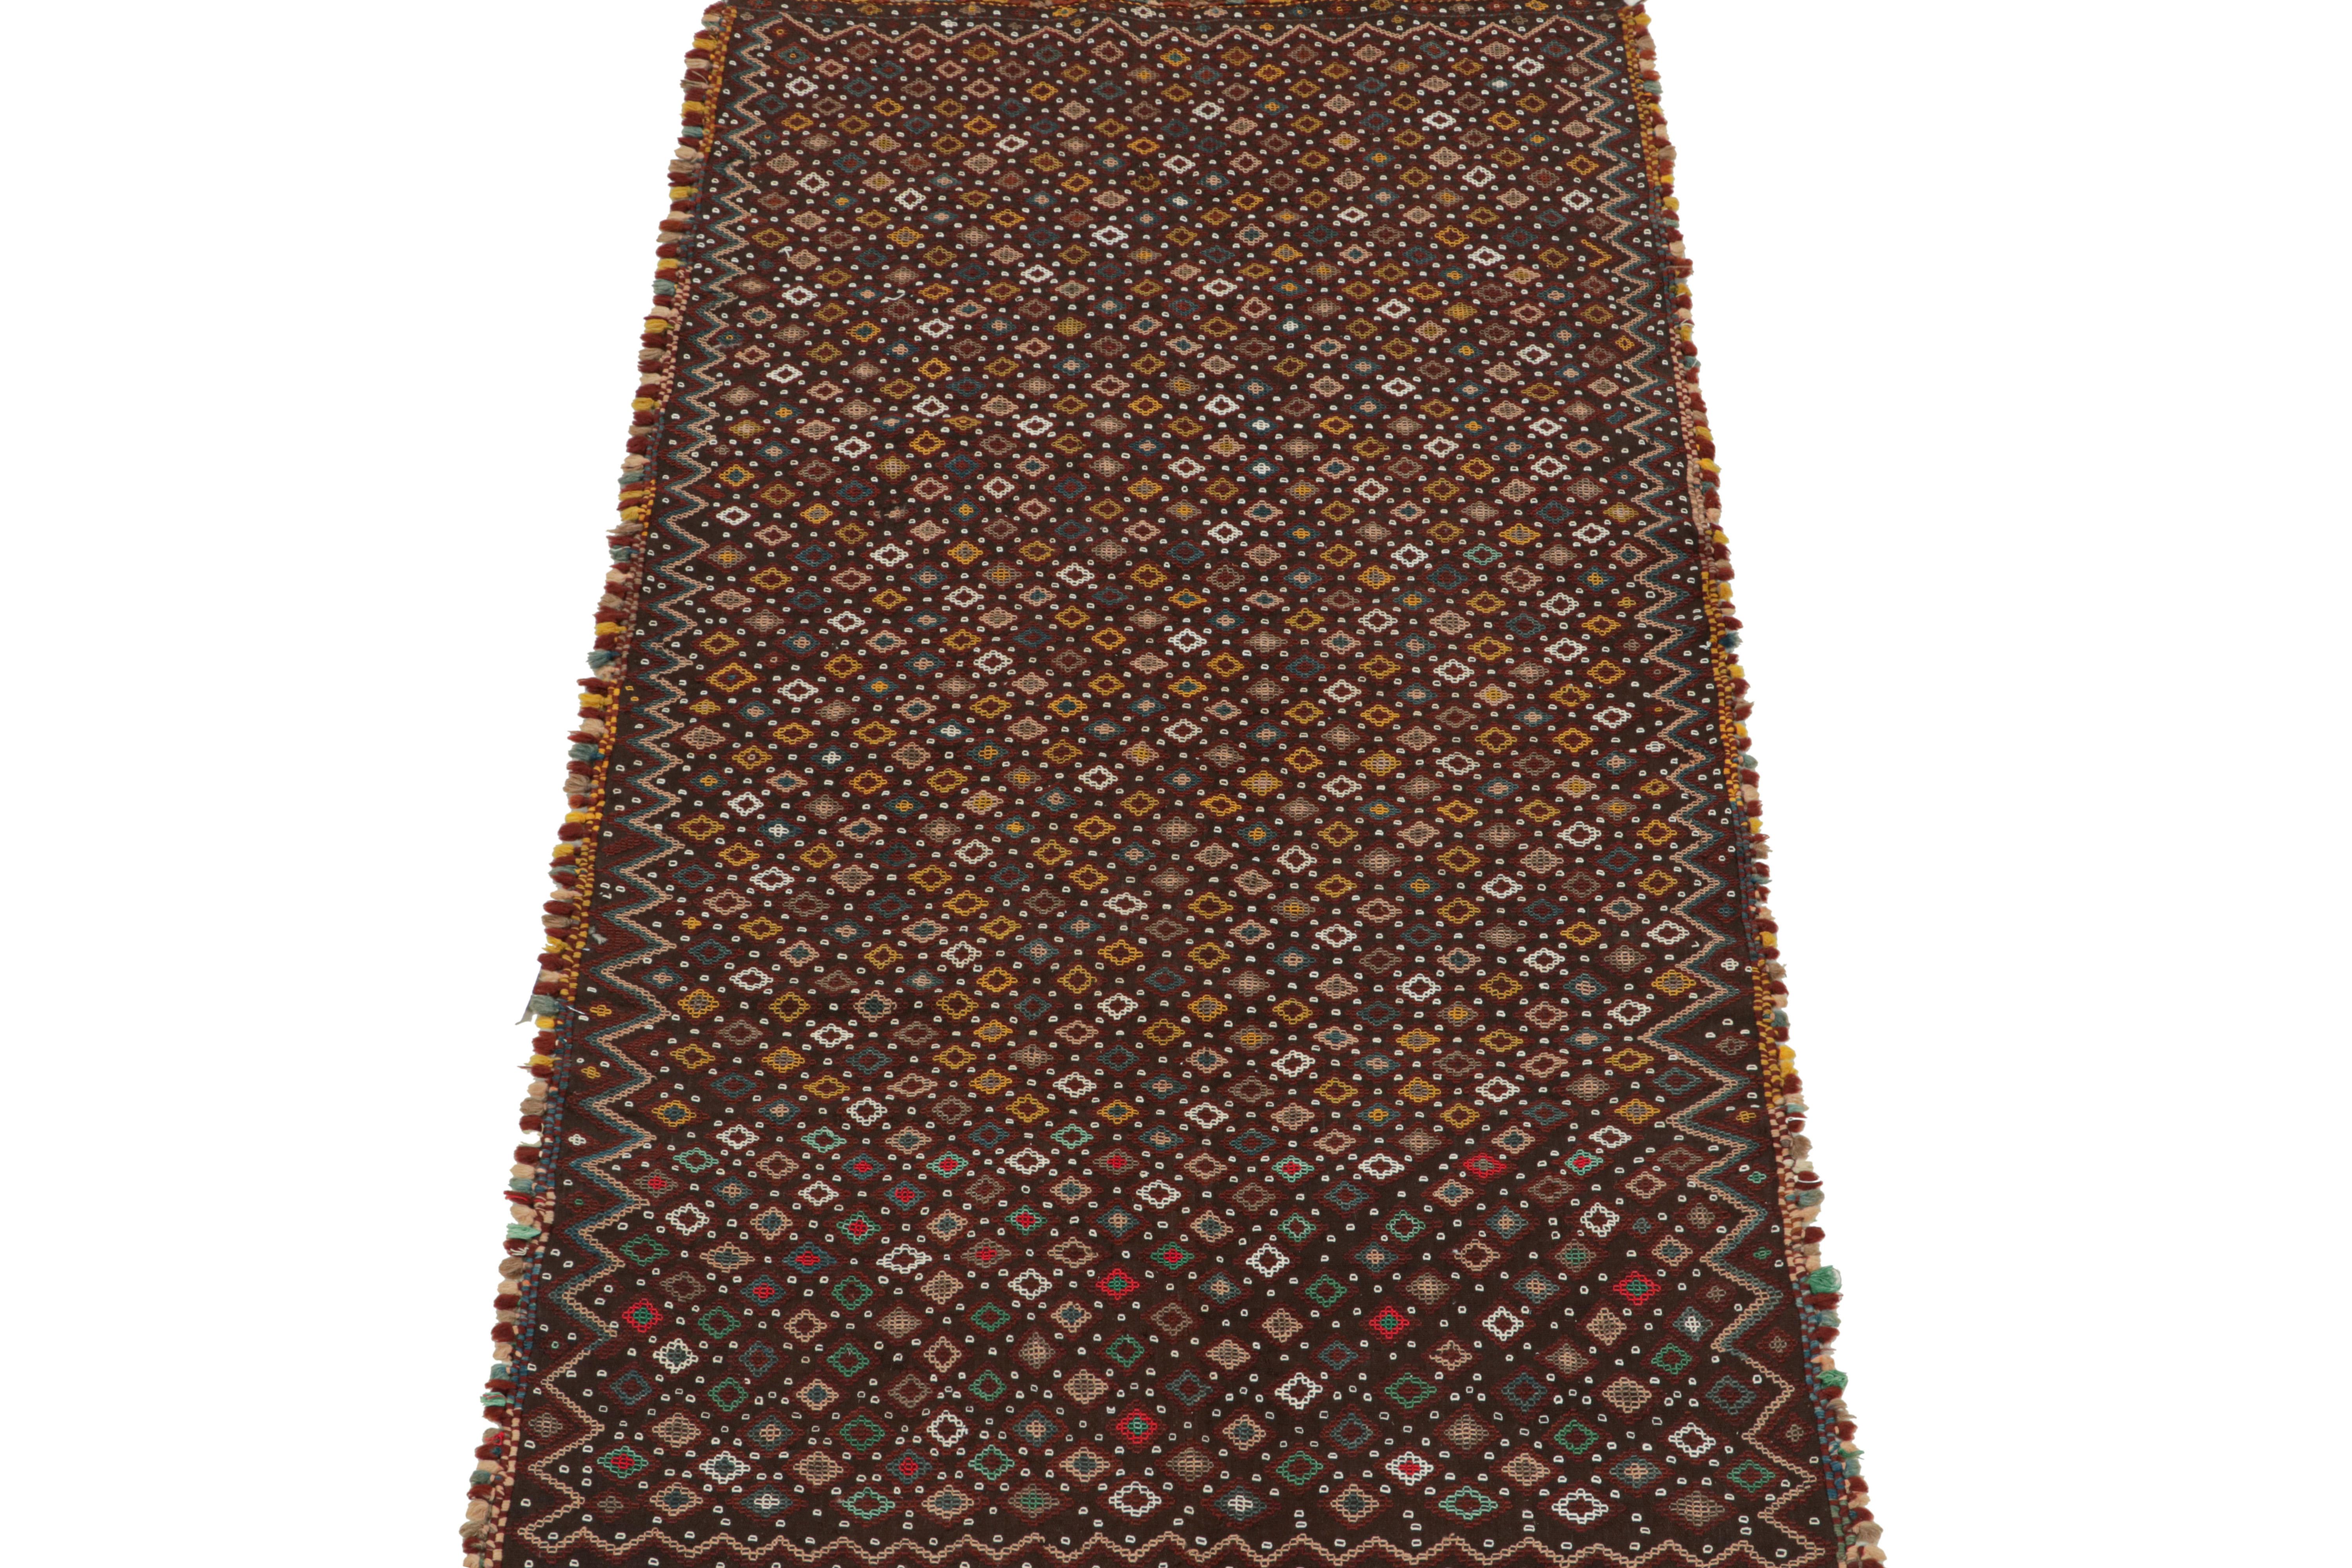 This vintage 4x7 Turkish Kilim is handwoven in wool, and originates circa 1950-1960.

Its colorway is polychromatic, though it favors a chocolate brown field and burgundy in its many colorful geometric patterns. Keen eyes will admire pronounced